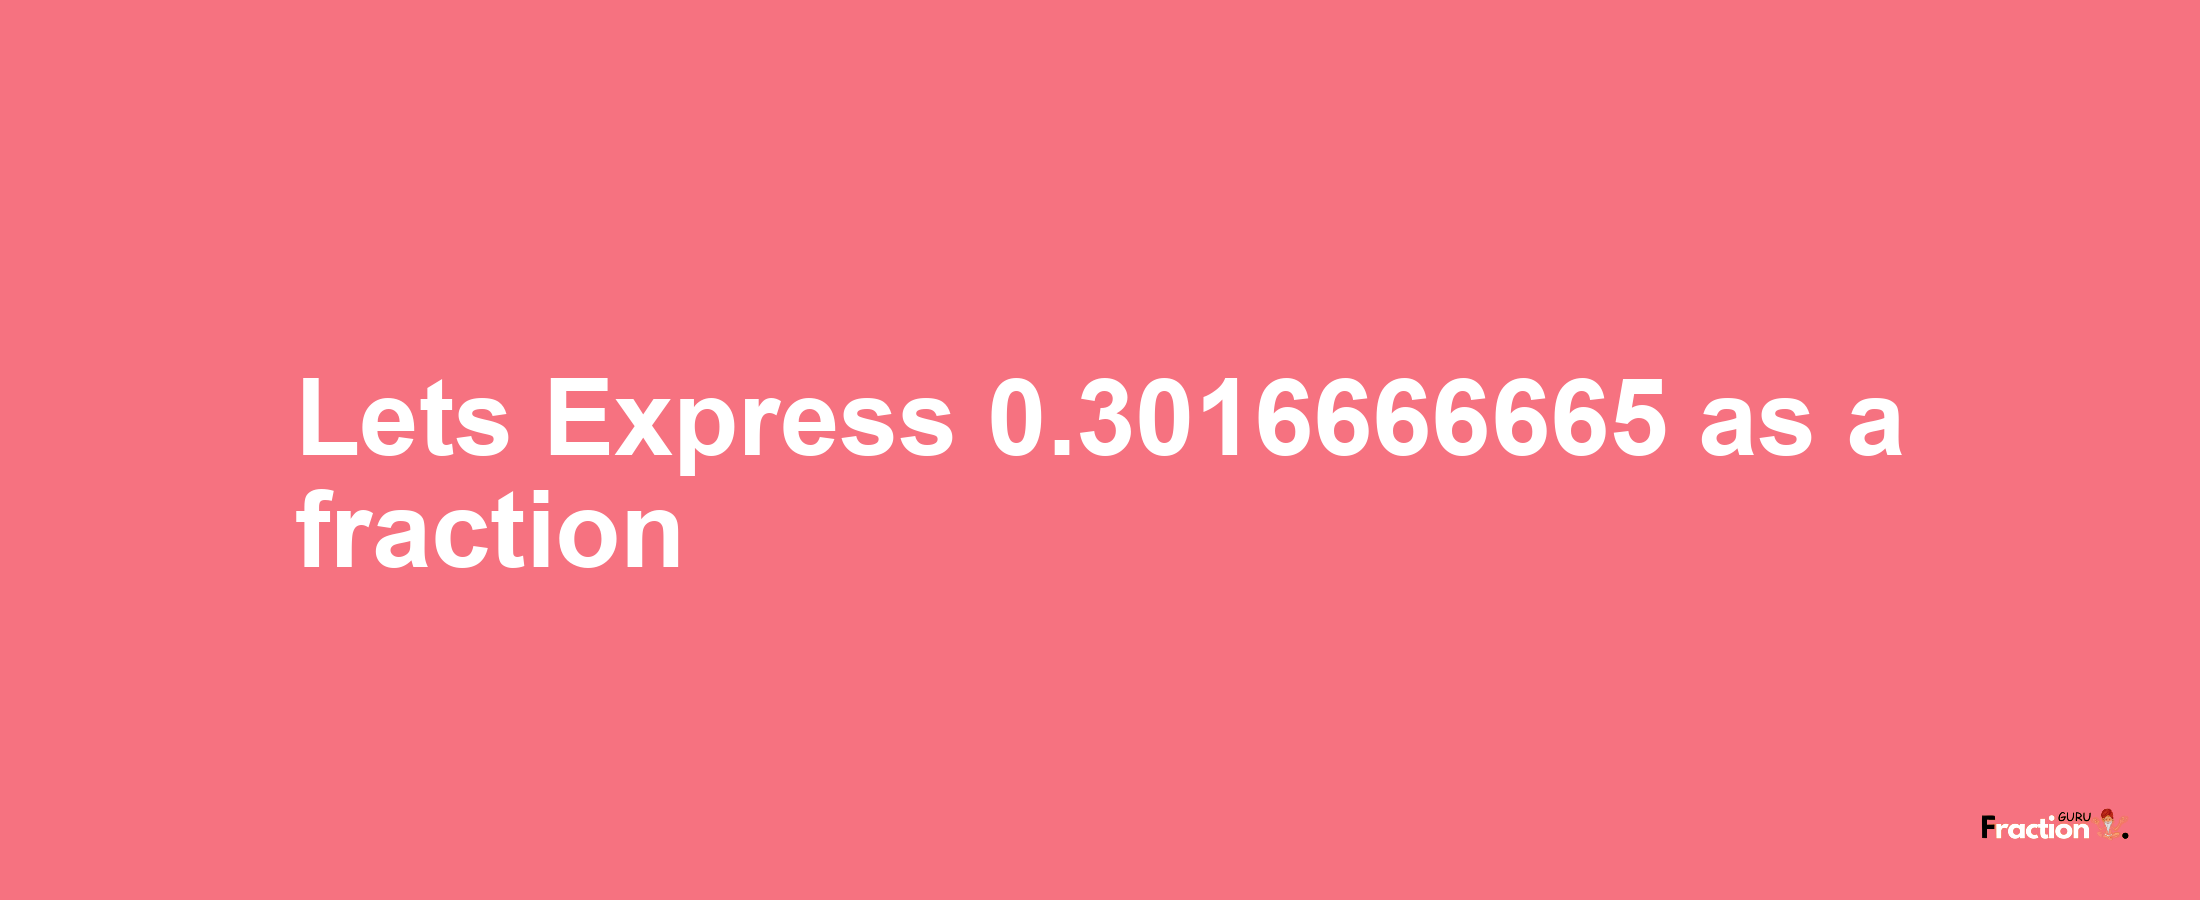 Lets Express 0.3016666665 as afraction